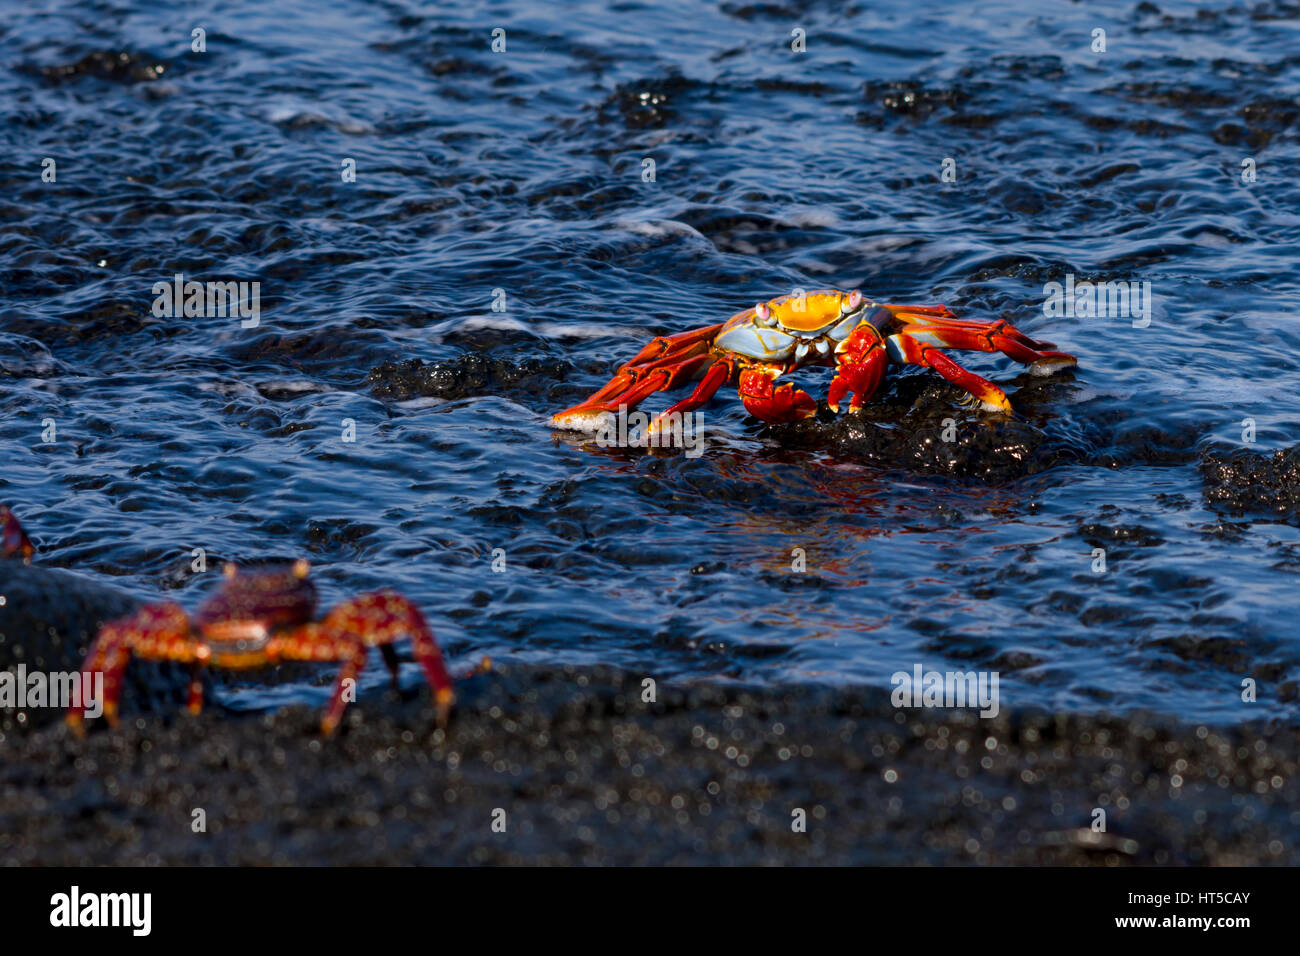 Brilliantly colored adult sally lightfoot crabs (Grapsus grapsus) in the water in the Galapagos Islands being watched by a juvenile from shore. Stock Photo